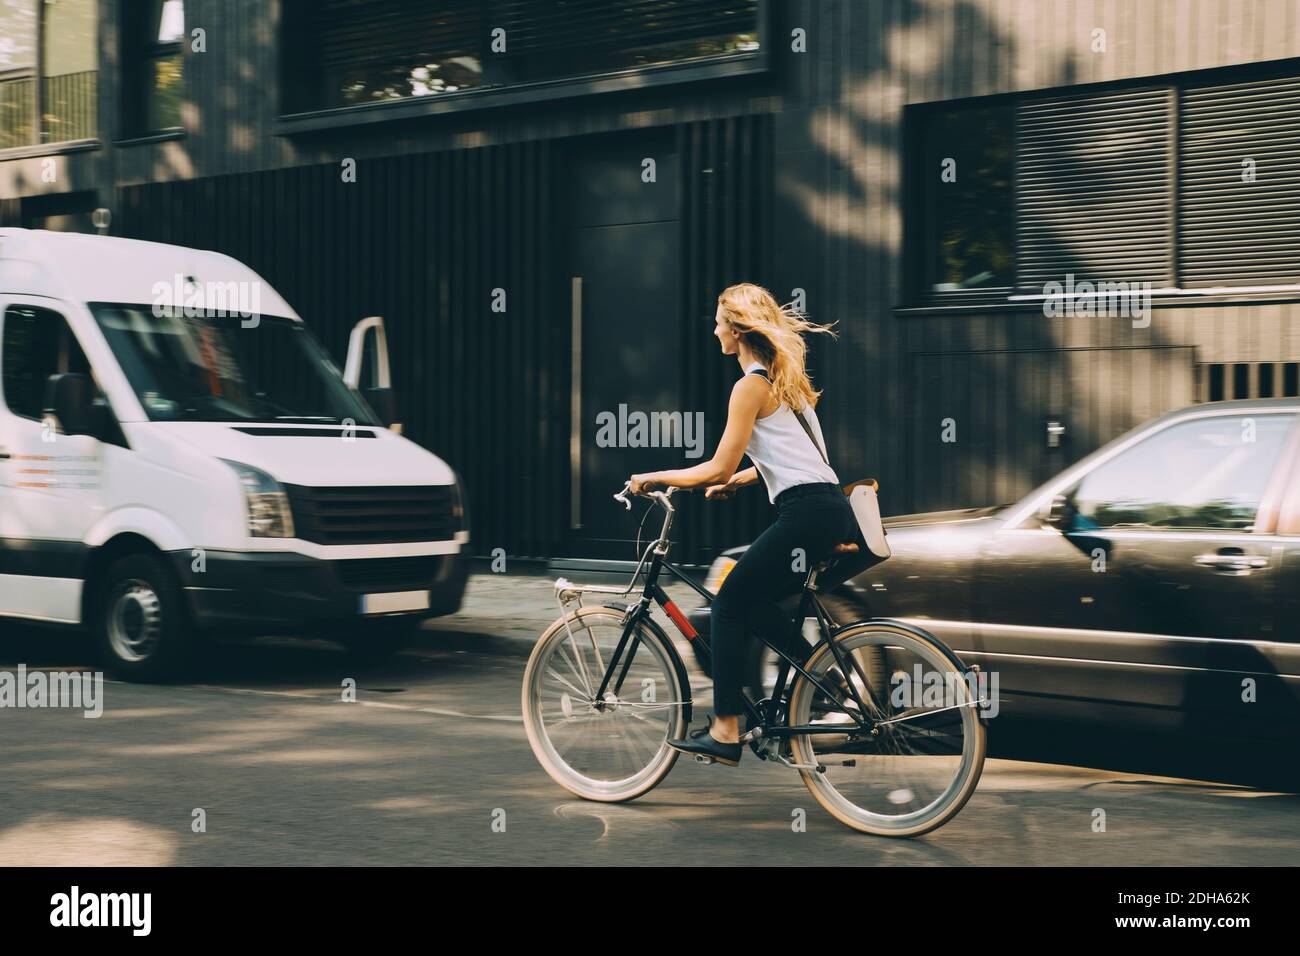 Full length of female entrepreneur riding bicycle on road in city Stock Photo